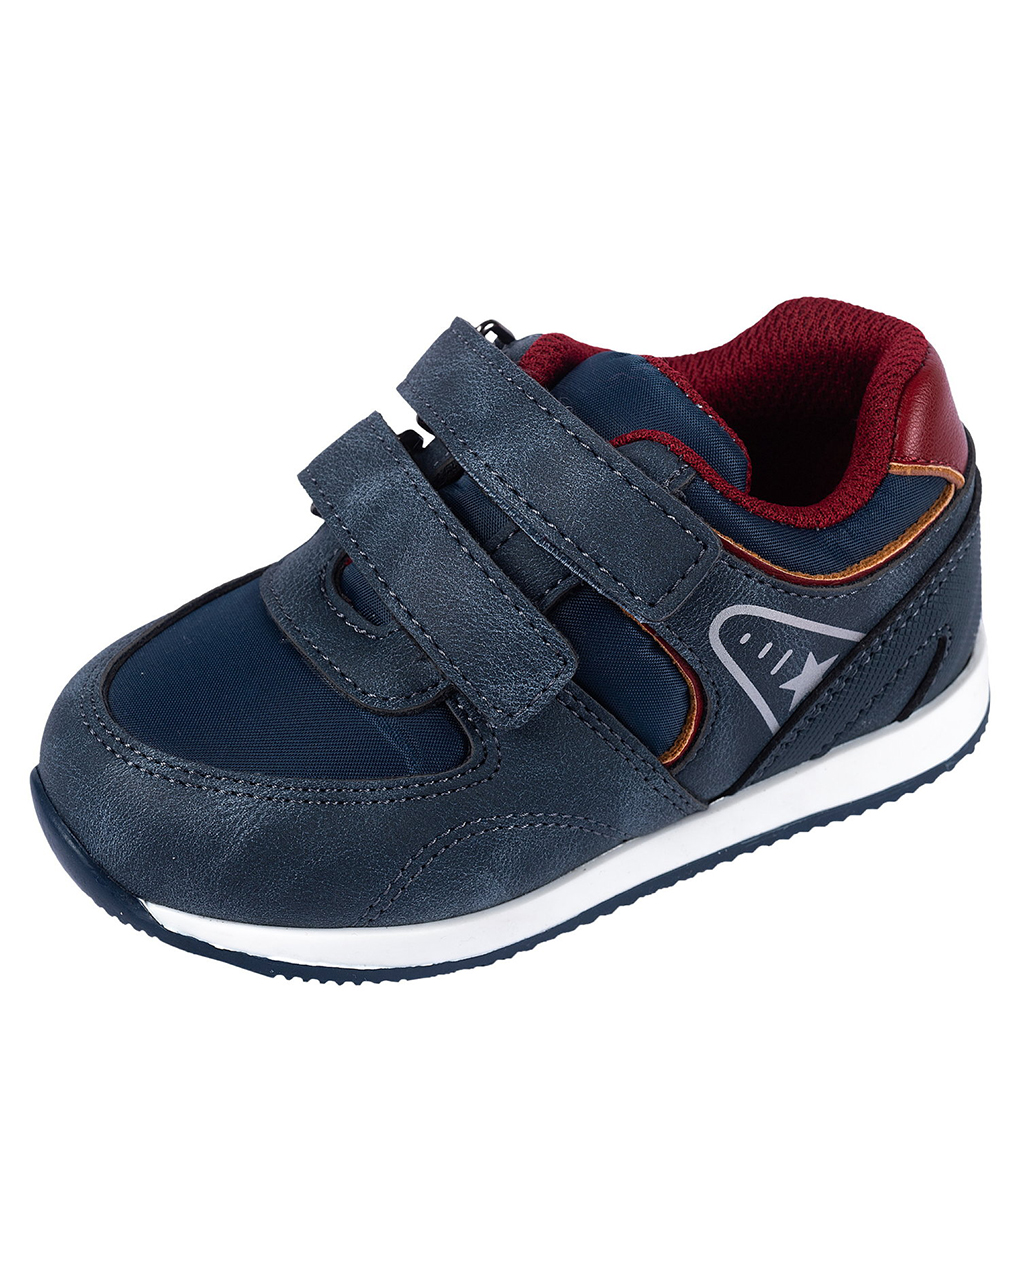 Baby trainer chicco falt - Chicco